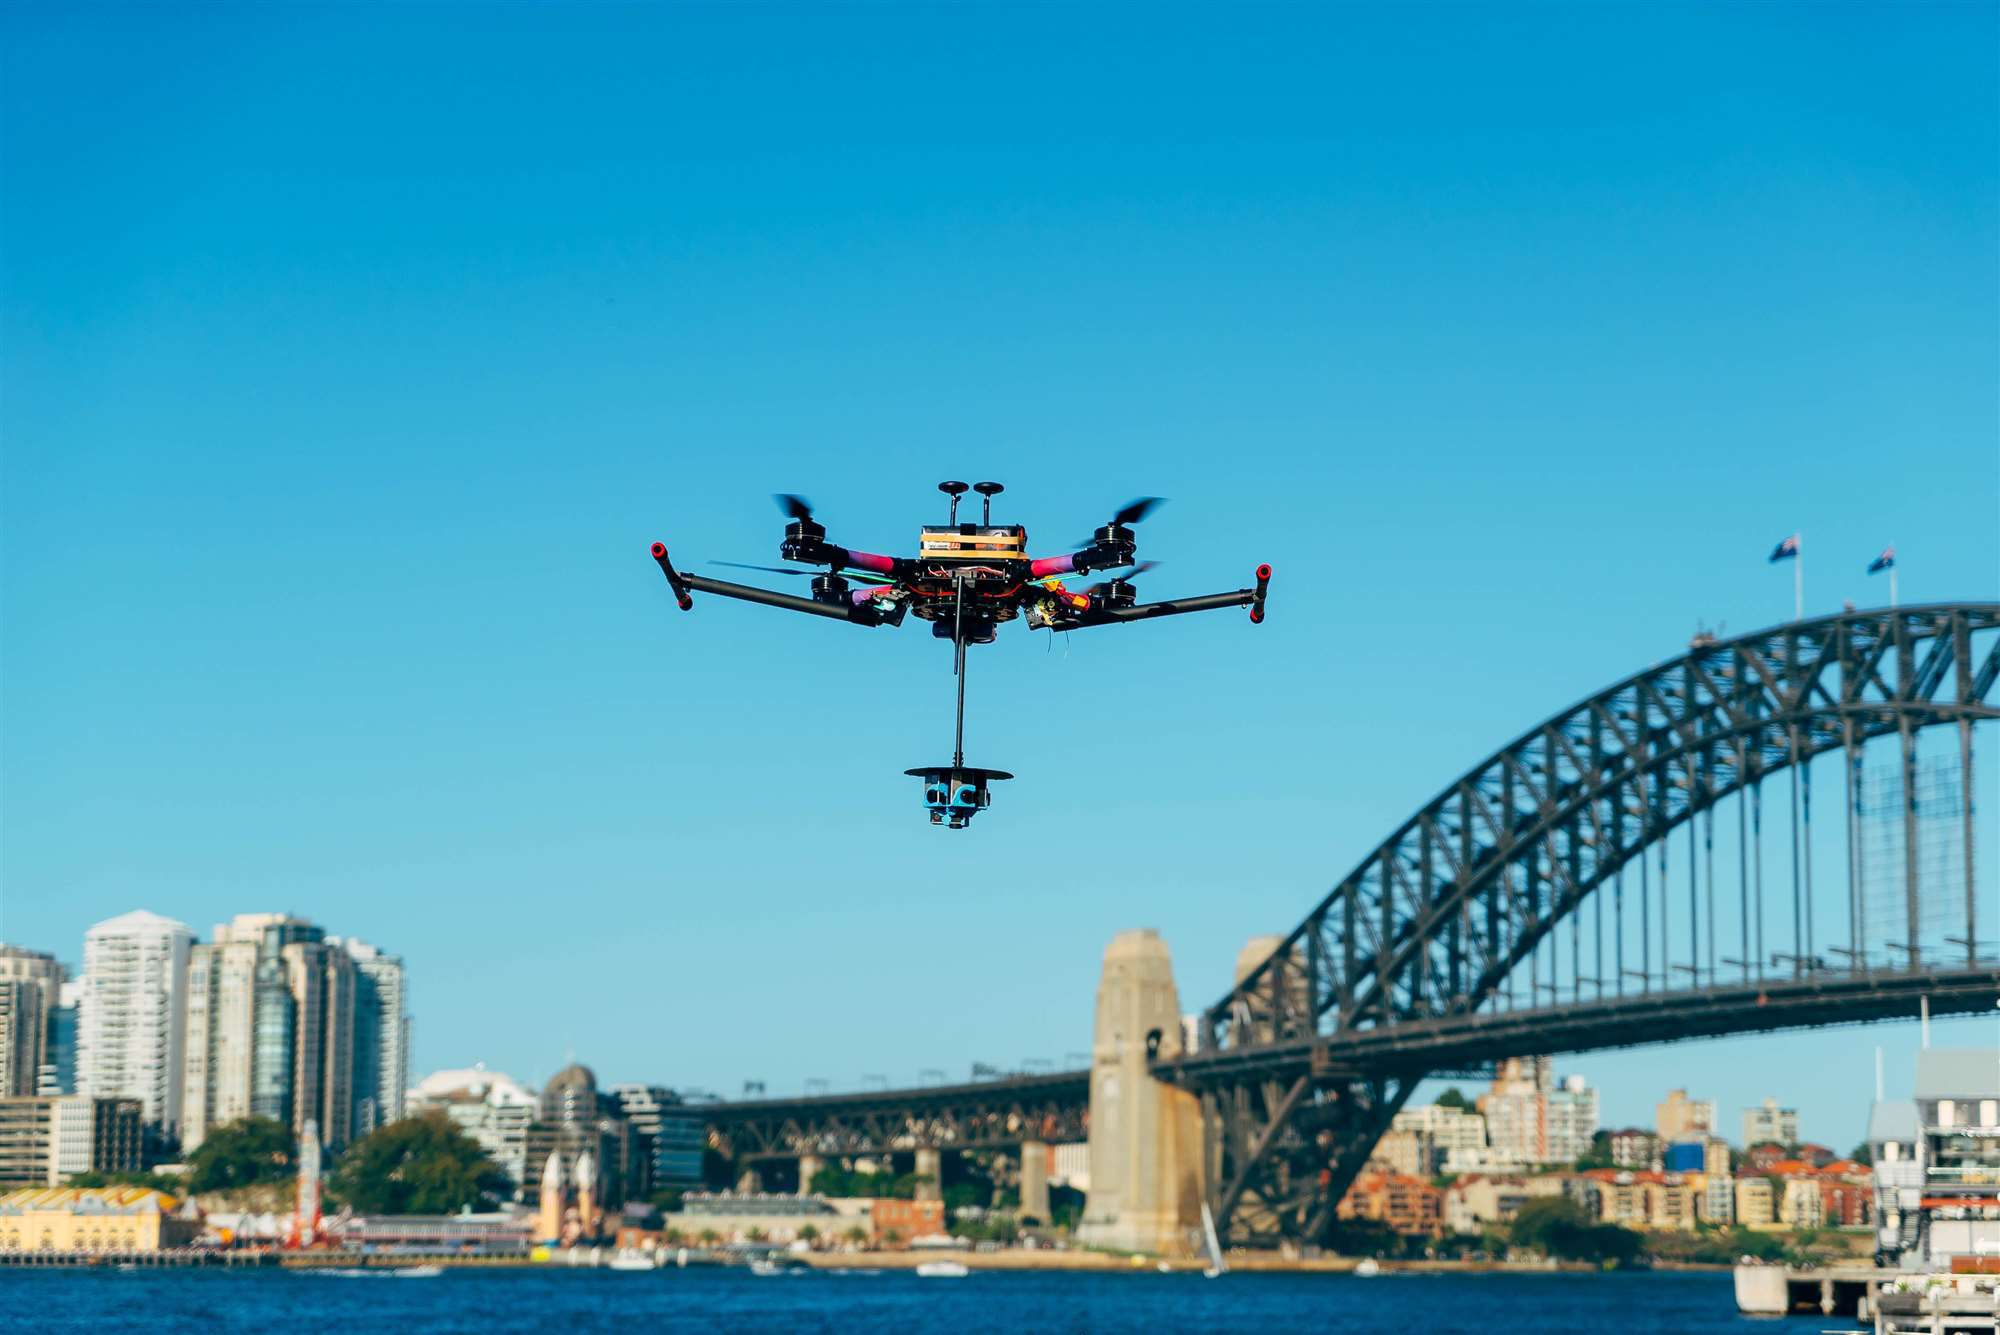 Drone Photography and Video Production in Sydney